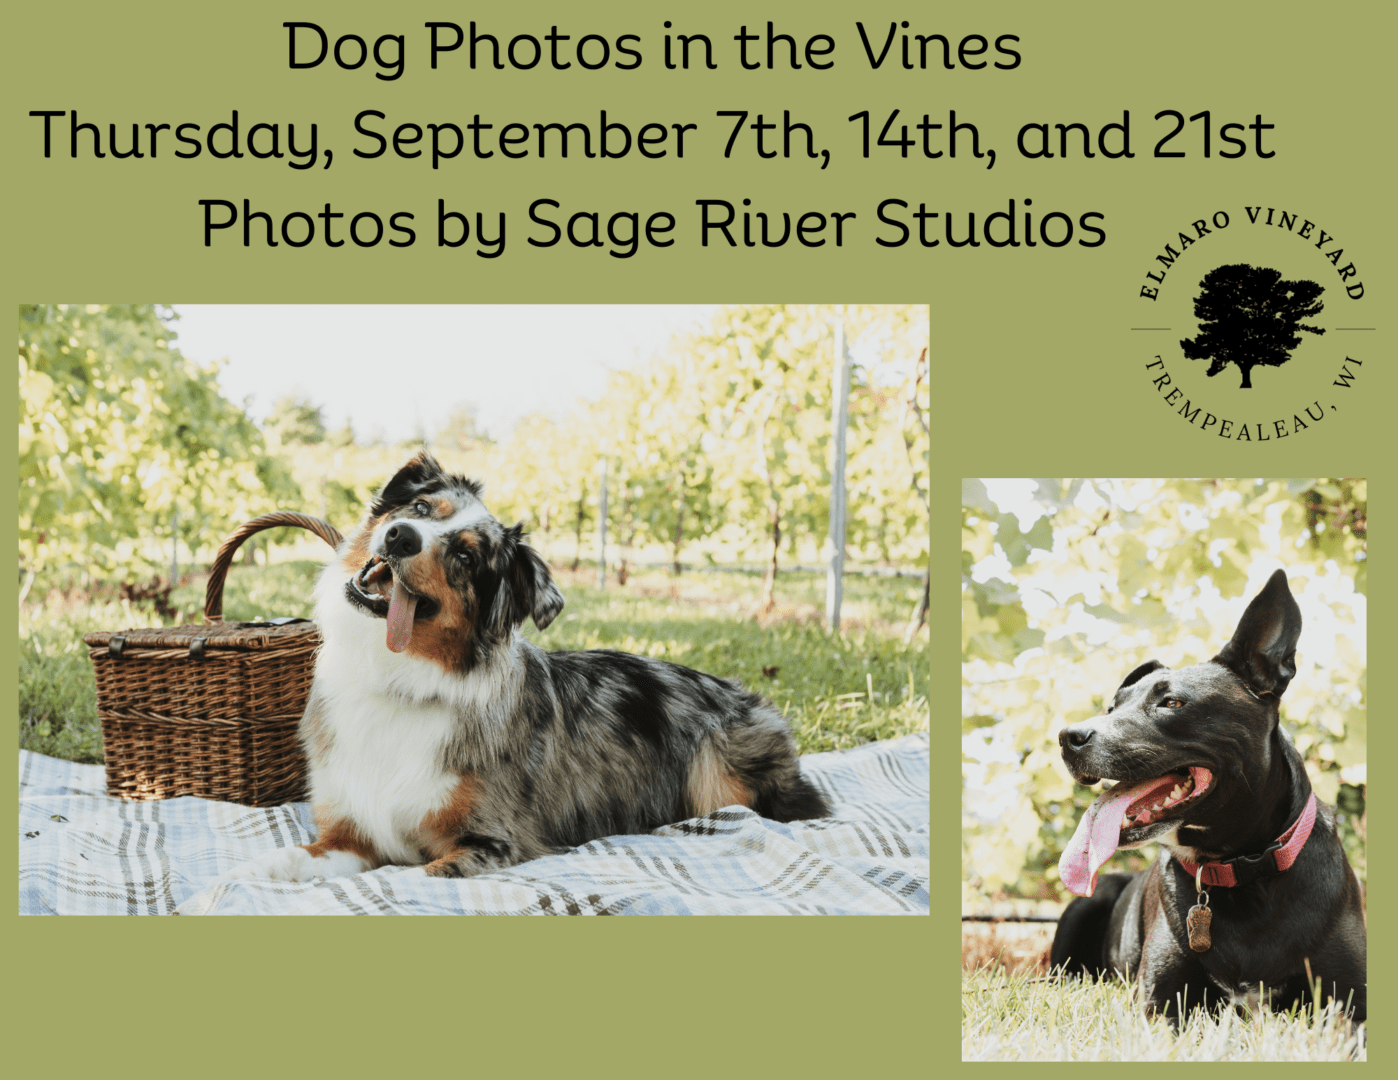 Dog Photos in the Vines Thursday, September 7th, 14th, and 21st Photos by Sage River Studios